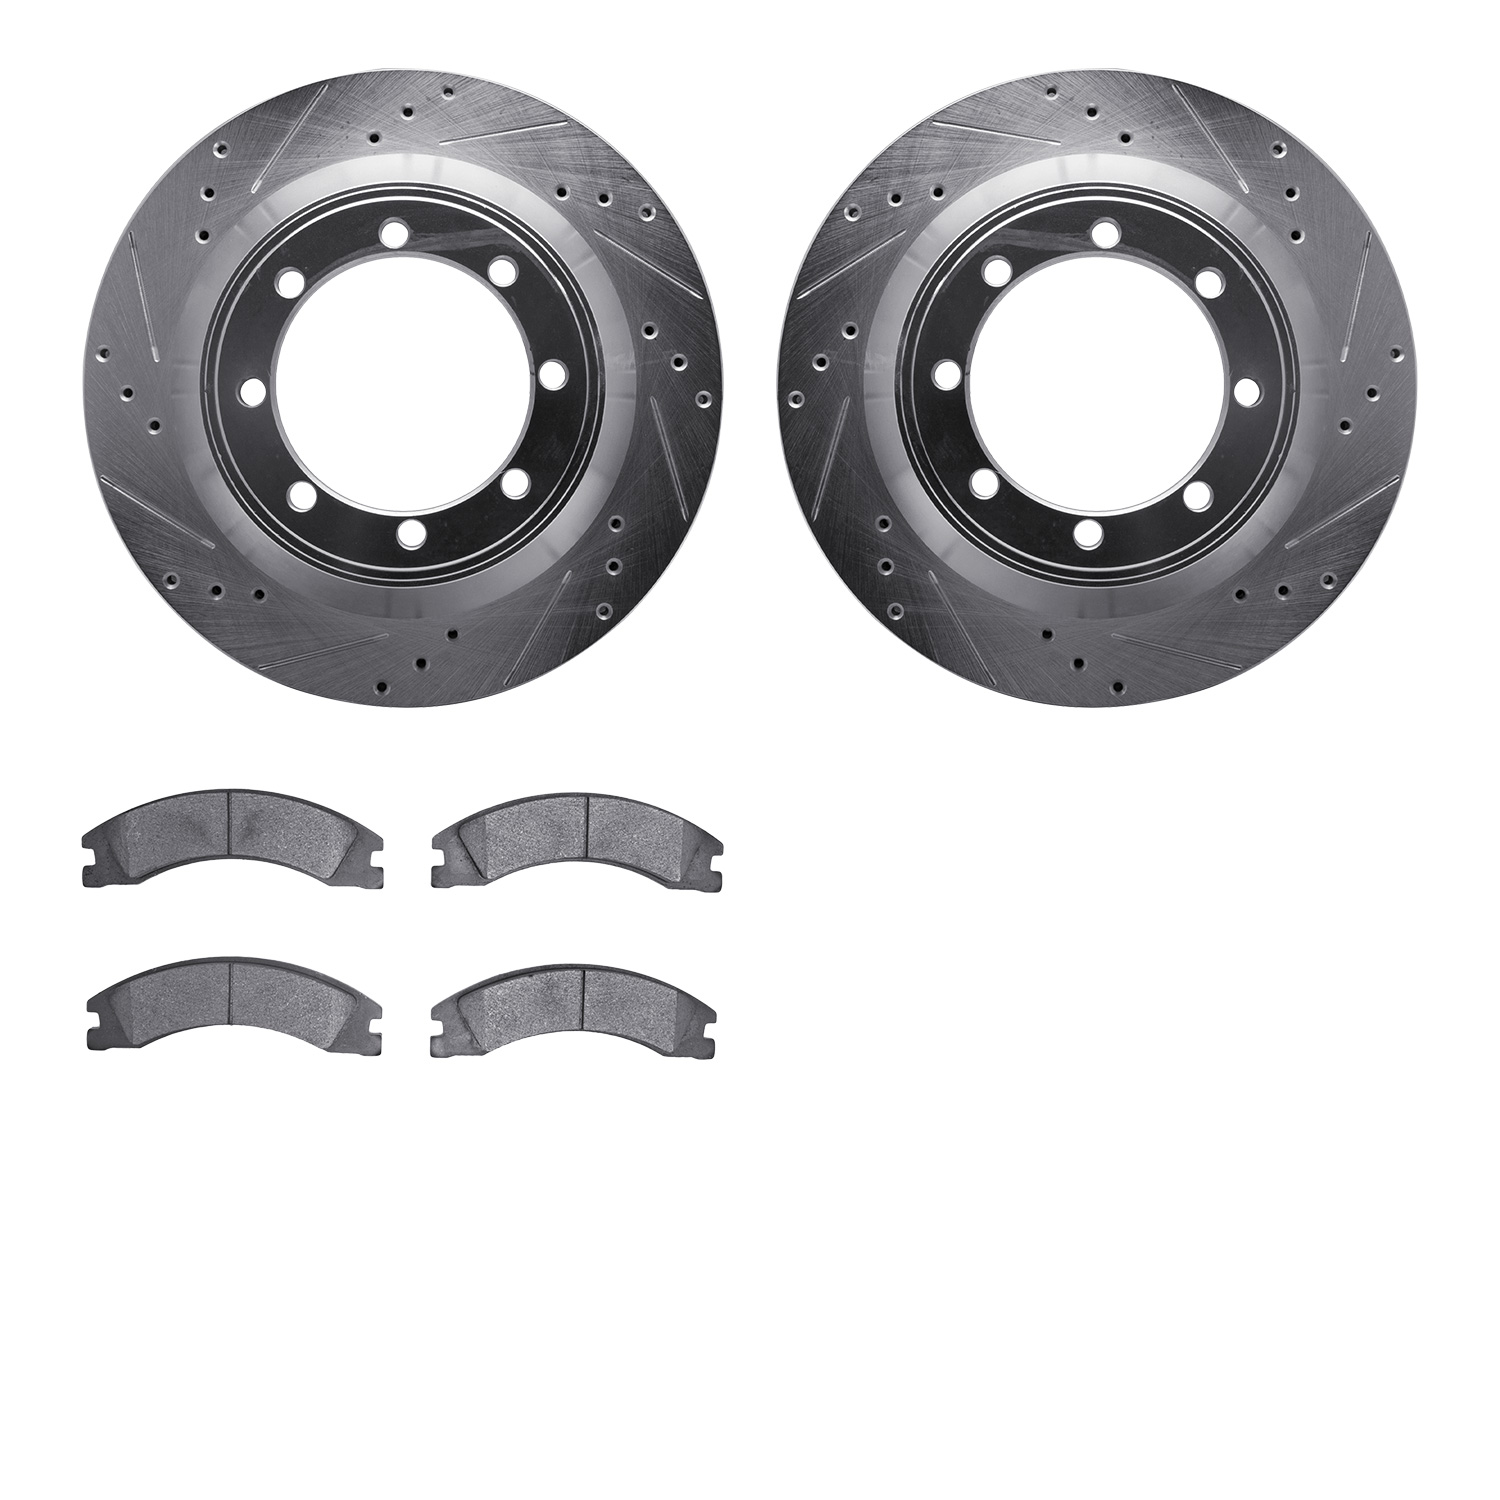 7502-99645 Drilled/Slotted Brake Rotors w/5000 Advanced Brake Pads Kit [Silver], Fits Select Ford/Lincoln/Mercury/Mazda, Positio